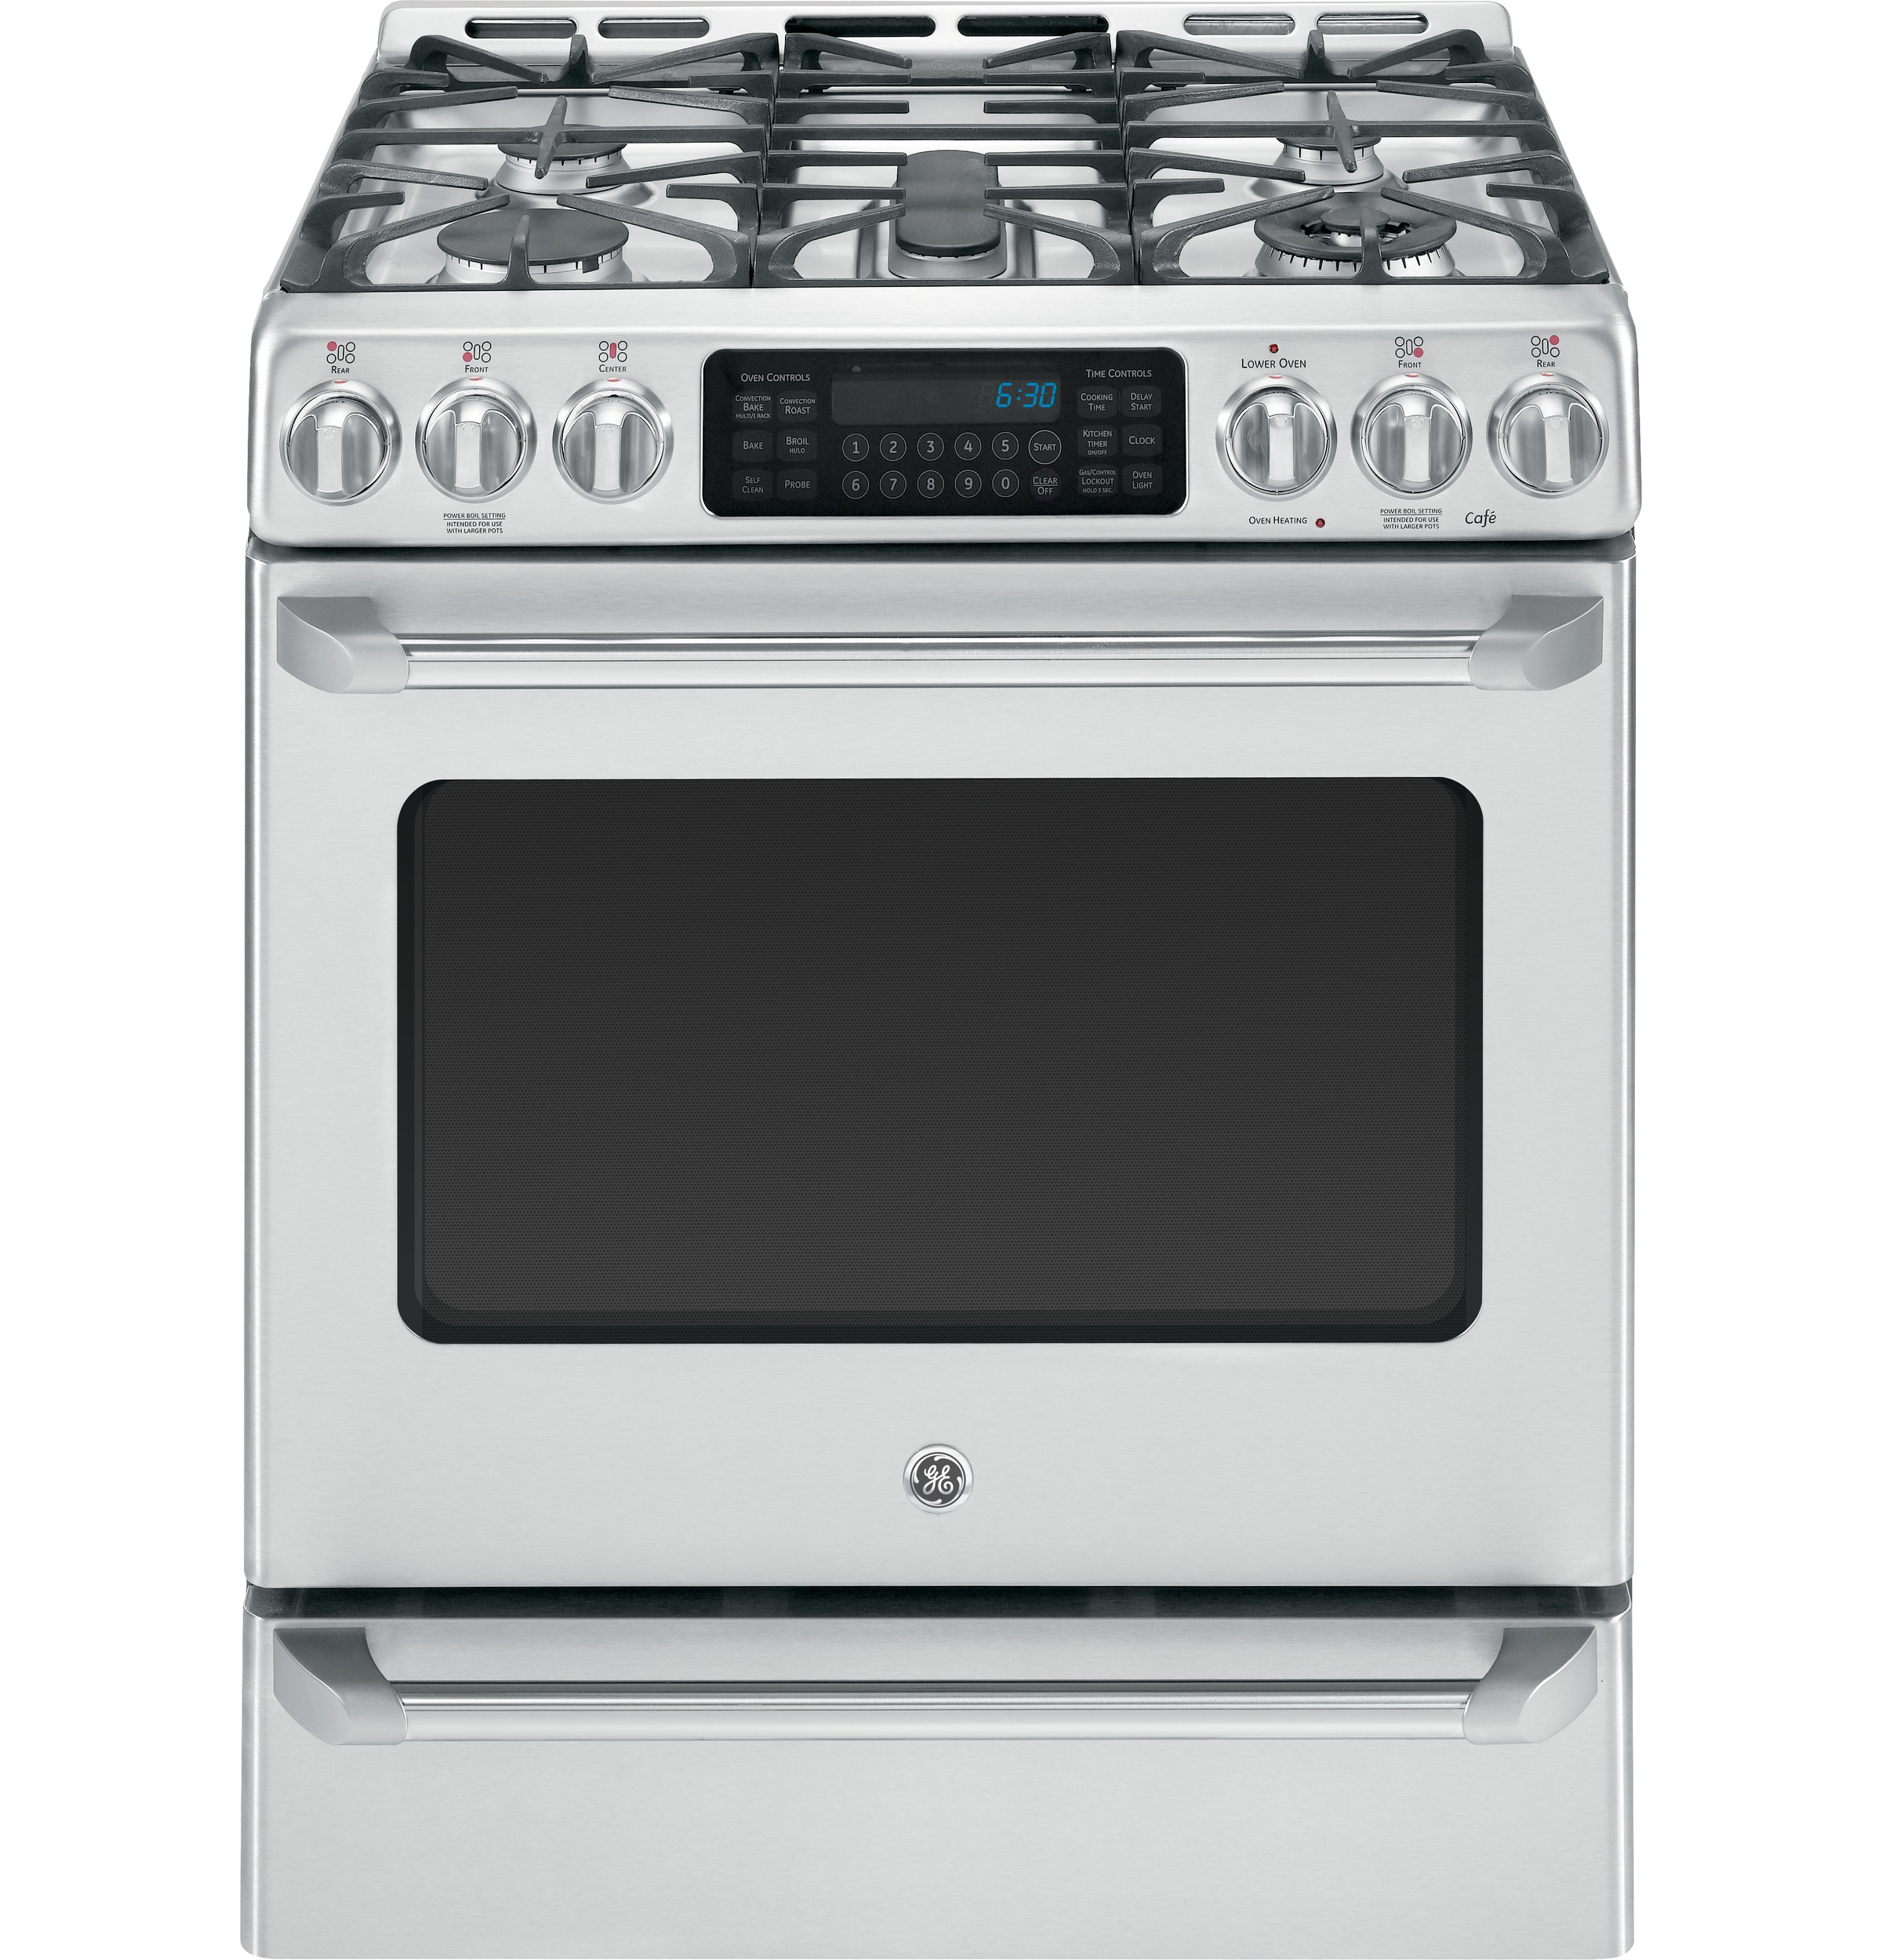 GE Cafe CGS985SETSS 6.4 cu. ft. Gas Range with Self-Cleaning Convection Ge Gas Stove Stainless Steel